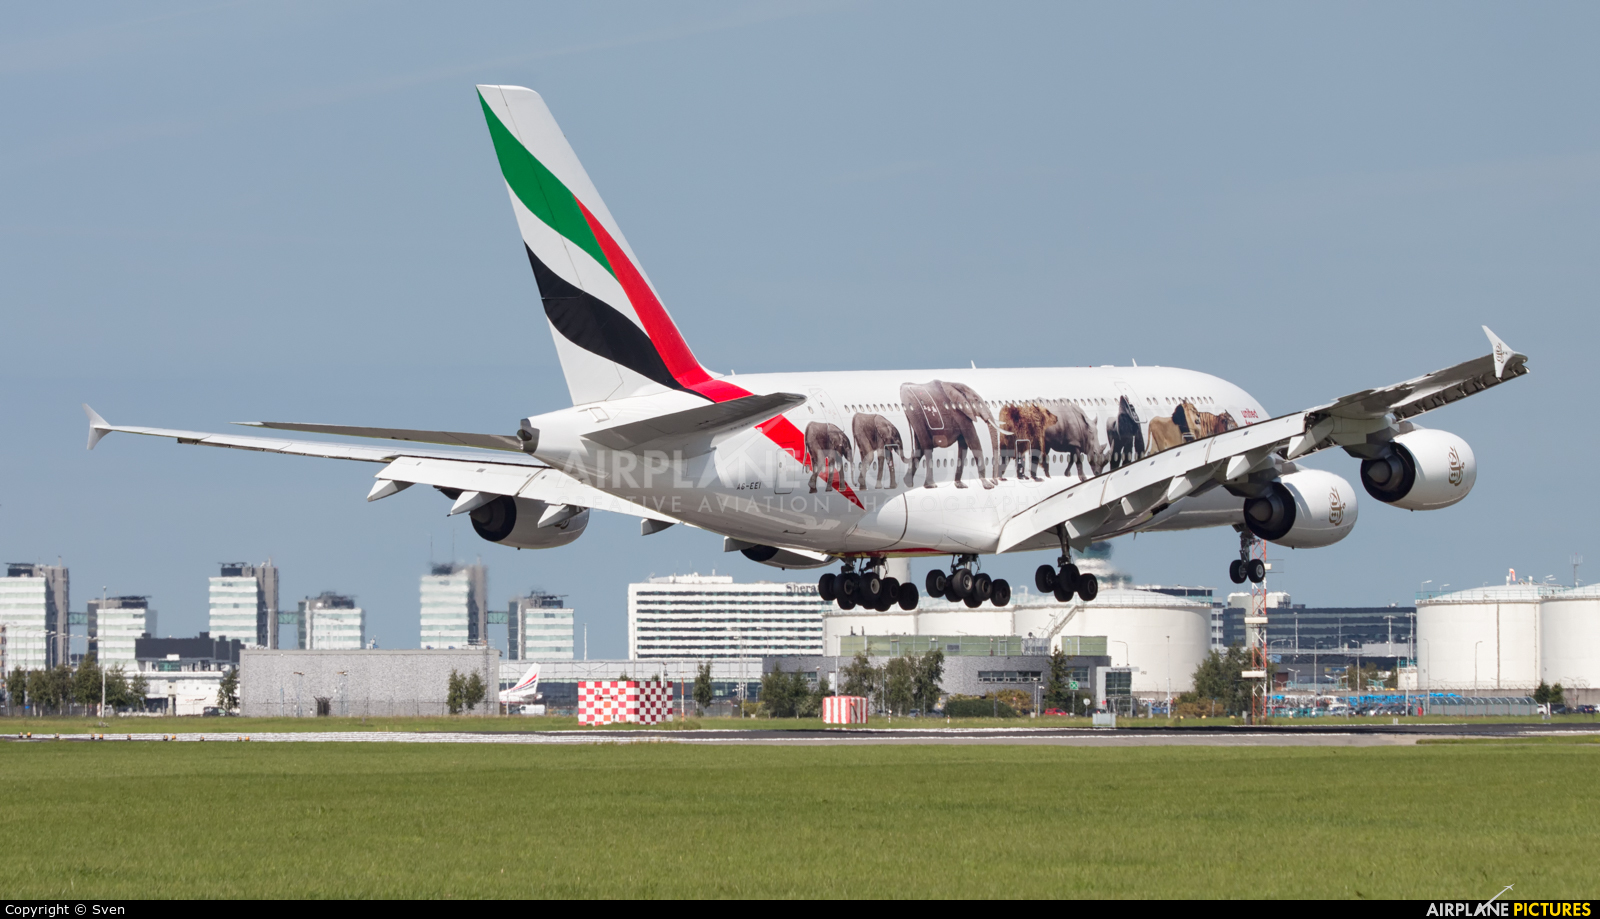 Emirates Airlines A6-EEI aircraft at Amsterdam - Schiphol